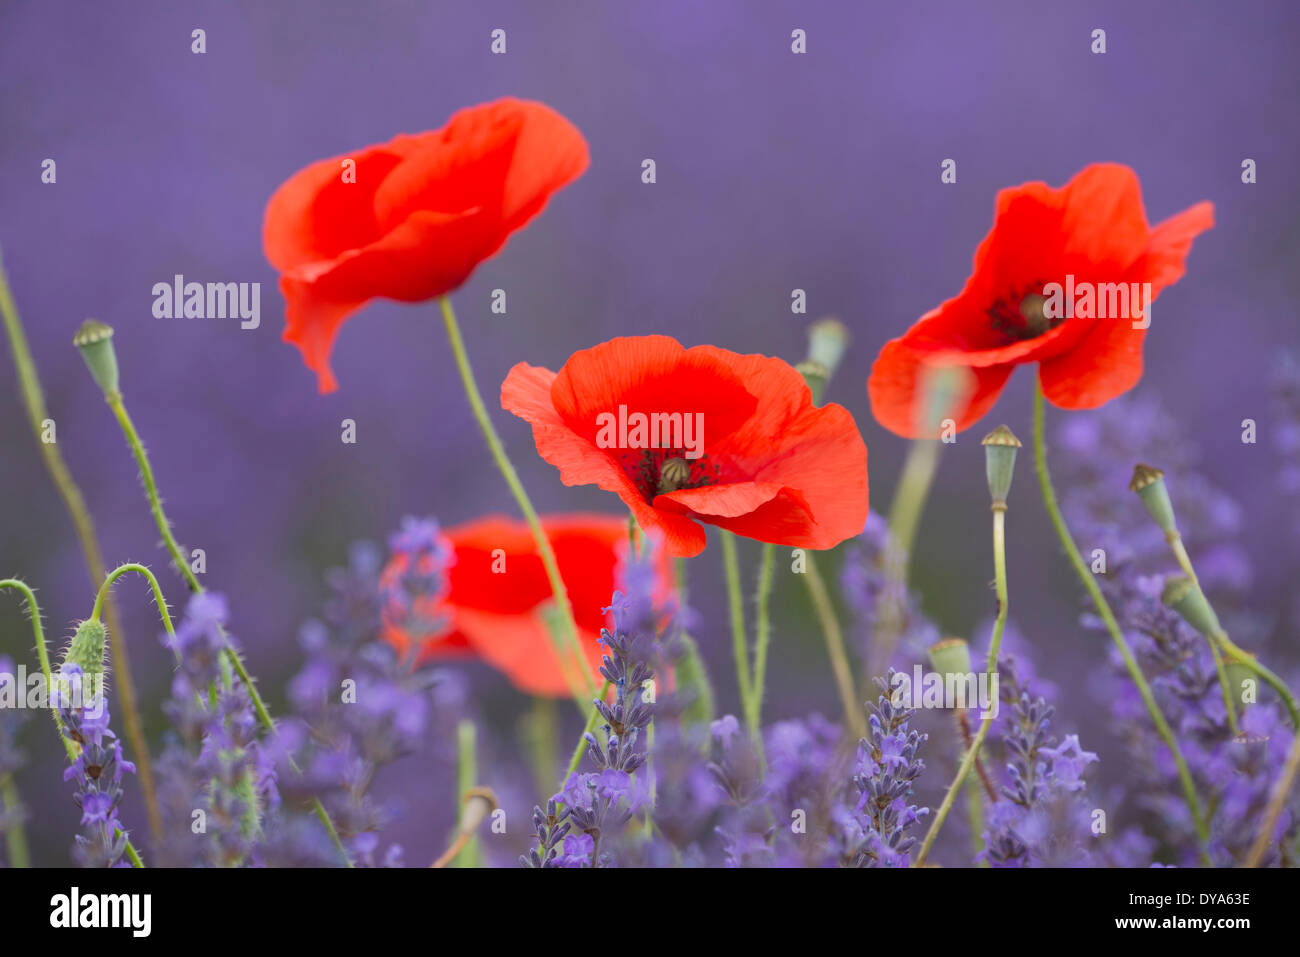 Europe, France, Provence, Vaucluse, poppy, poppies, bloom, flowers, lavender, nature, detail Stock Photo